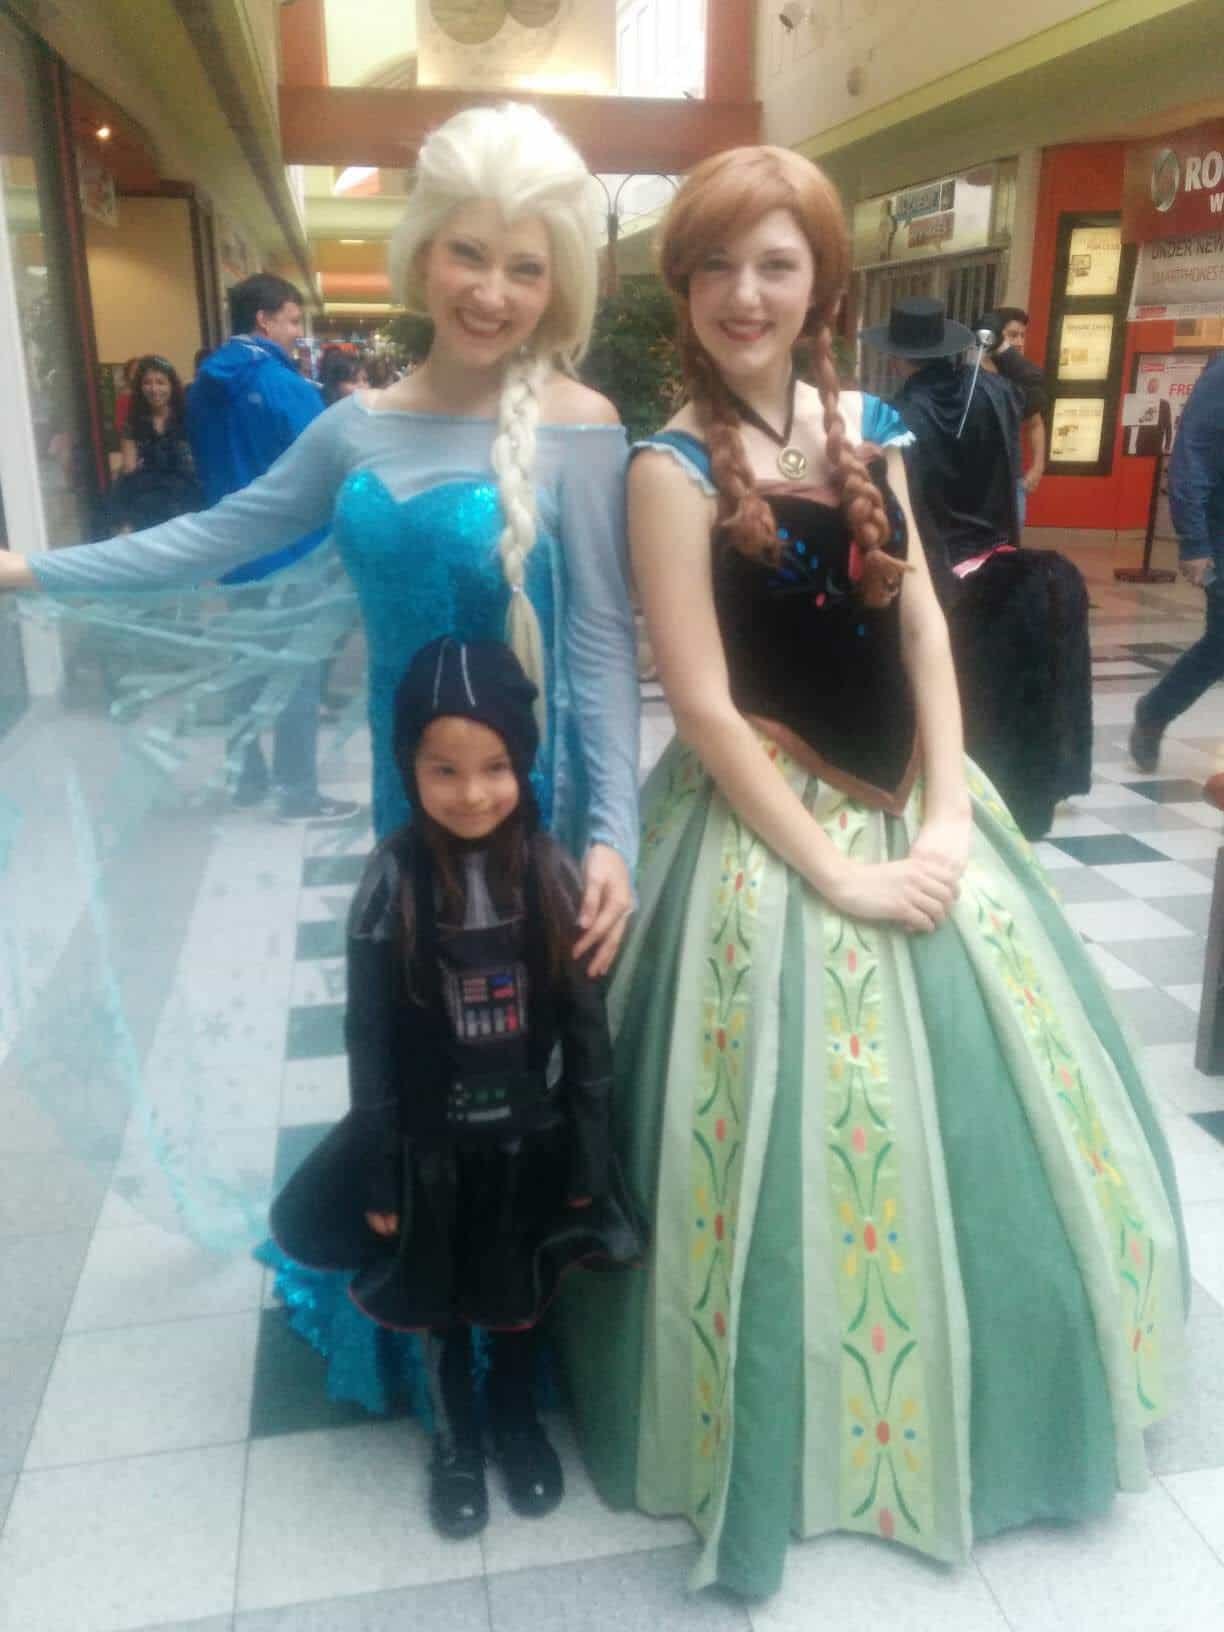 Calgary Kids came to visit with Ice Queen and Snow Princess